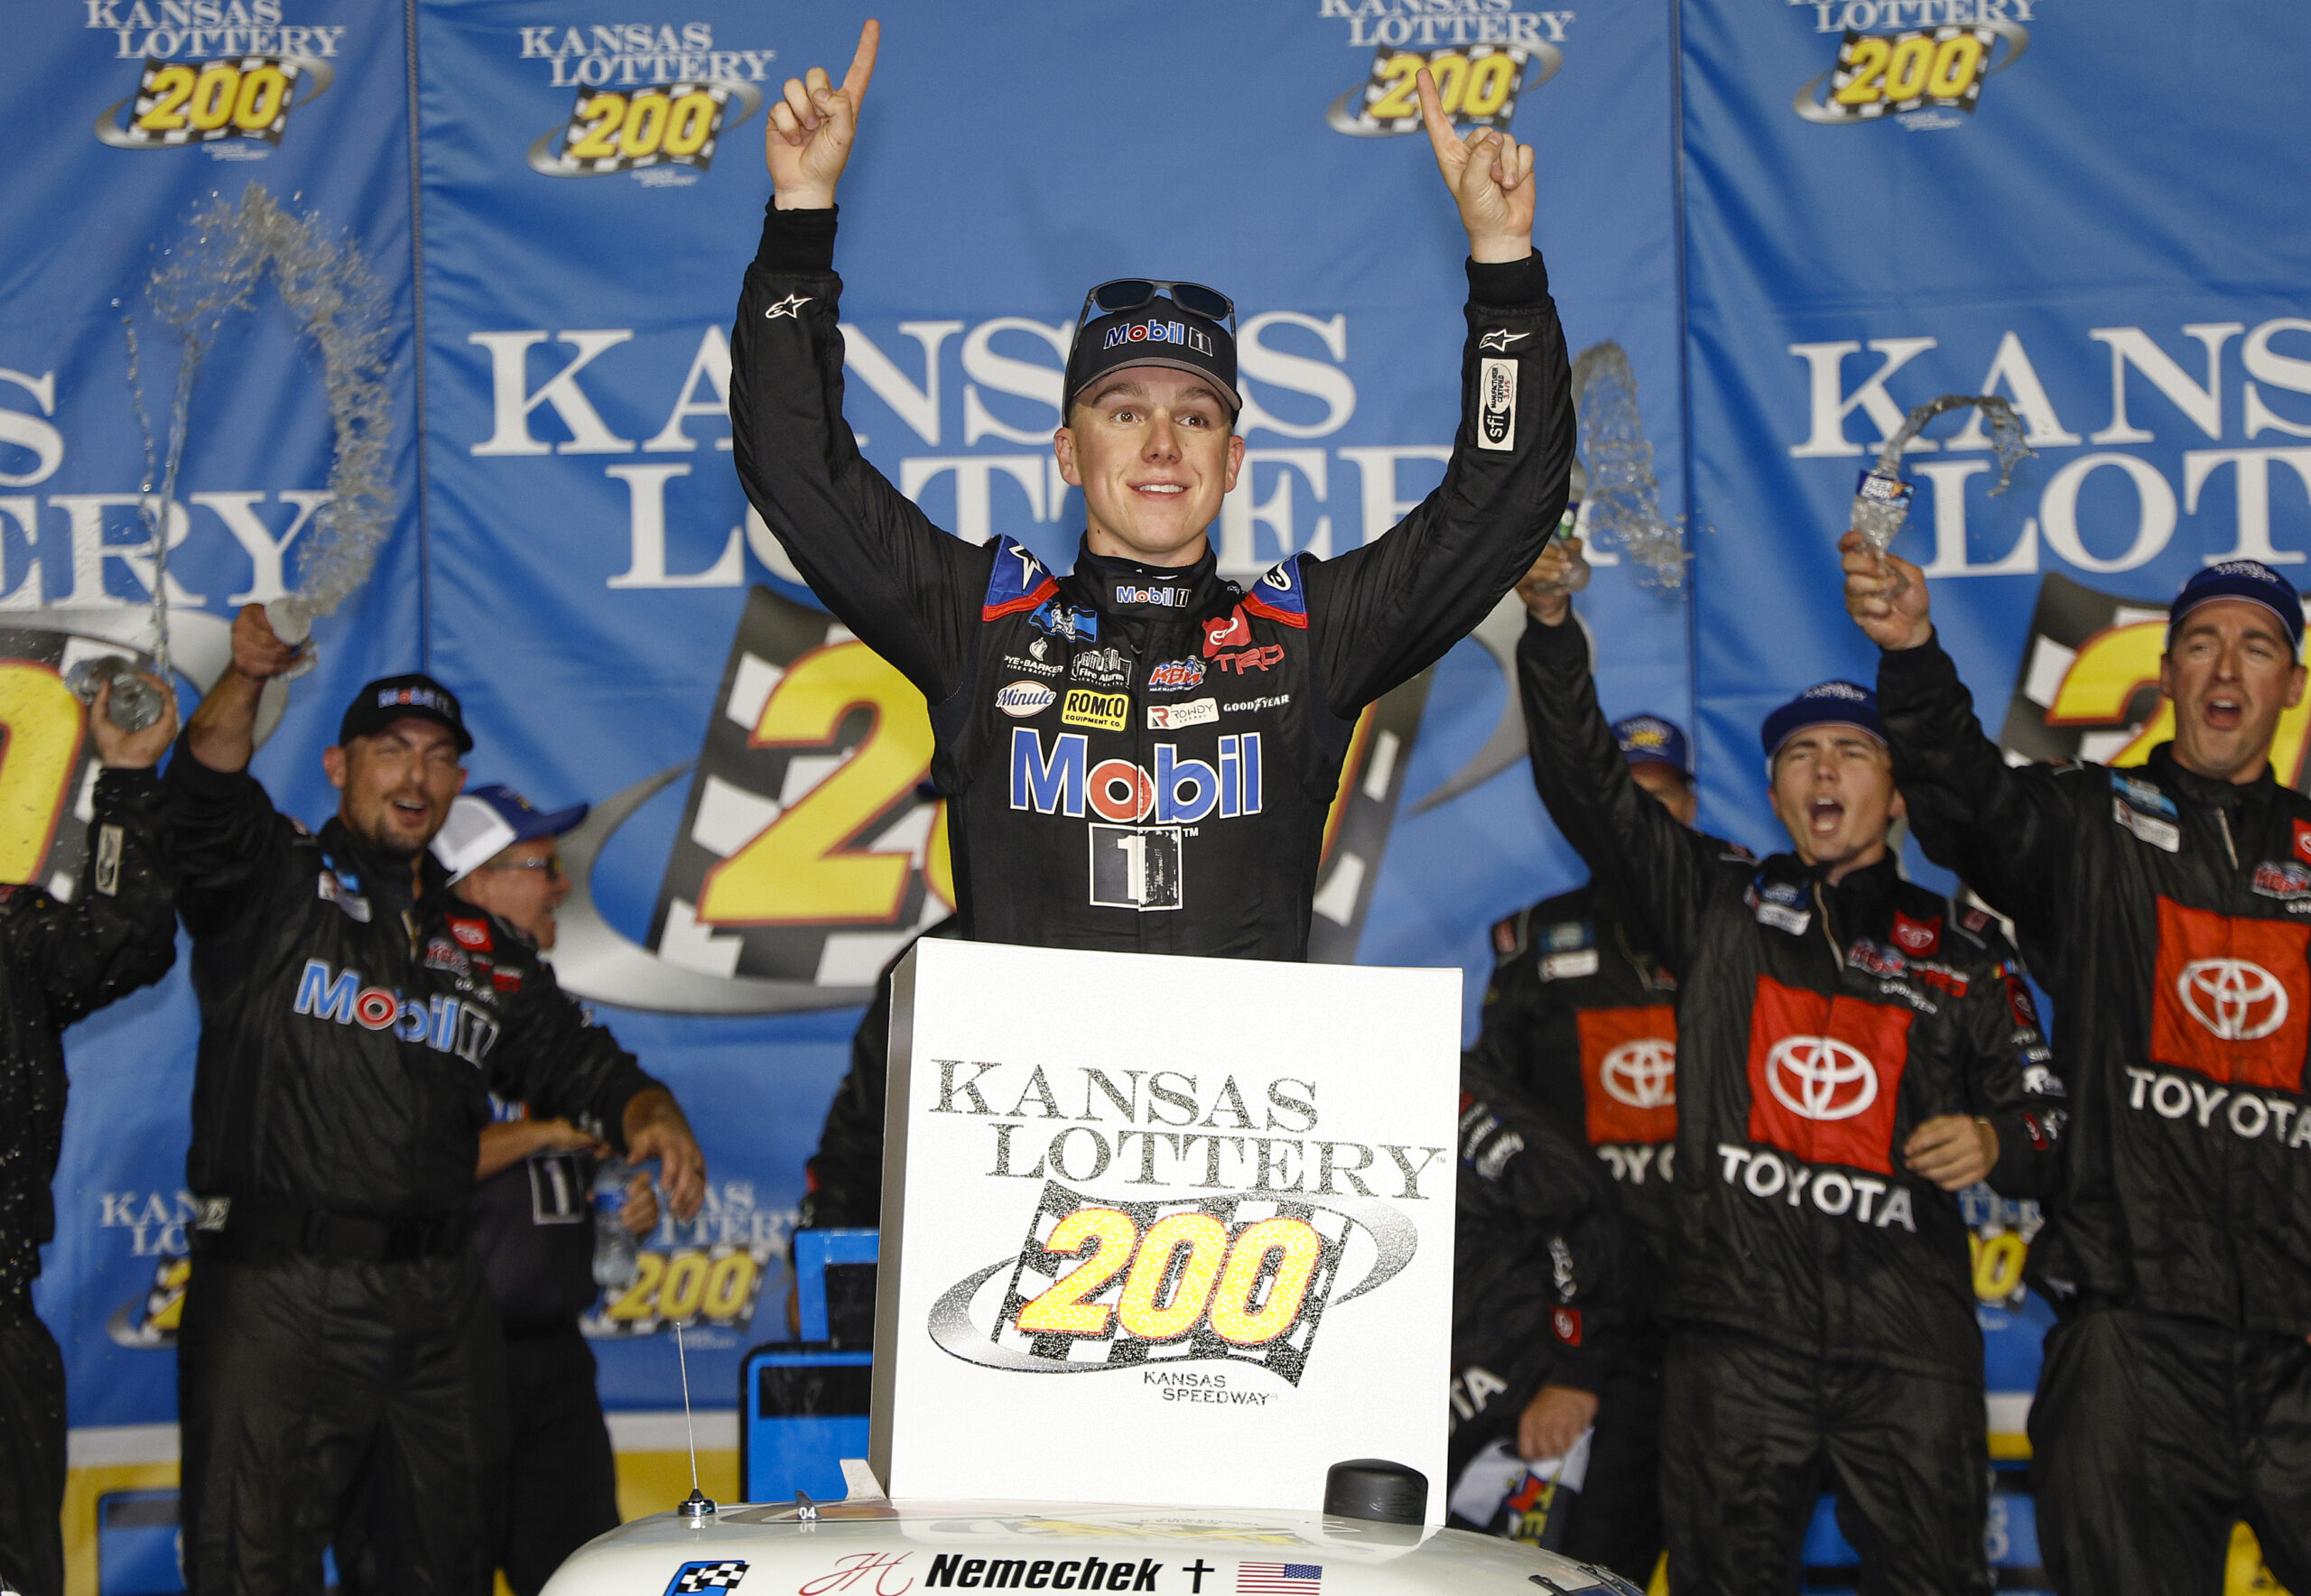 John Hunter Nemechek stands victorious in victory lane after winning the NASCAR Camping World Truck Series race at the Kansas Speedway.